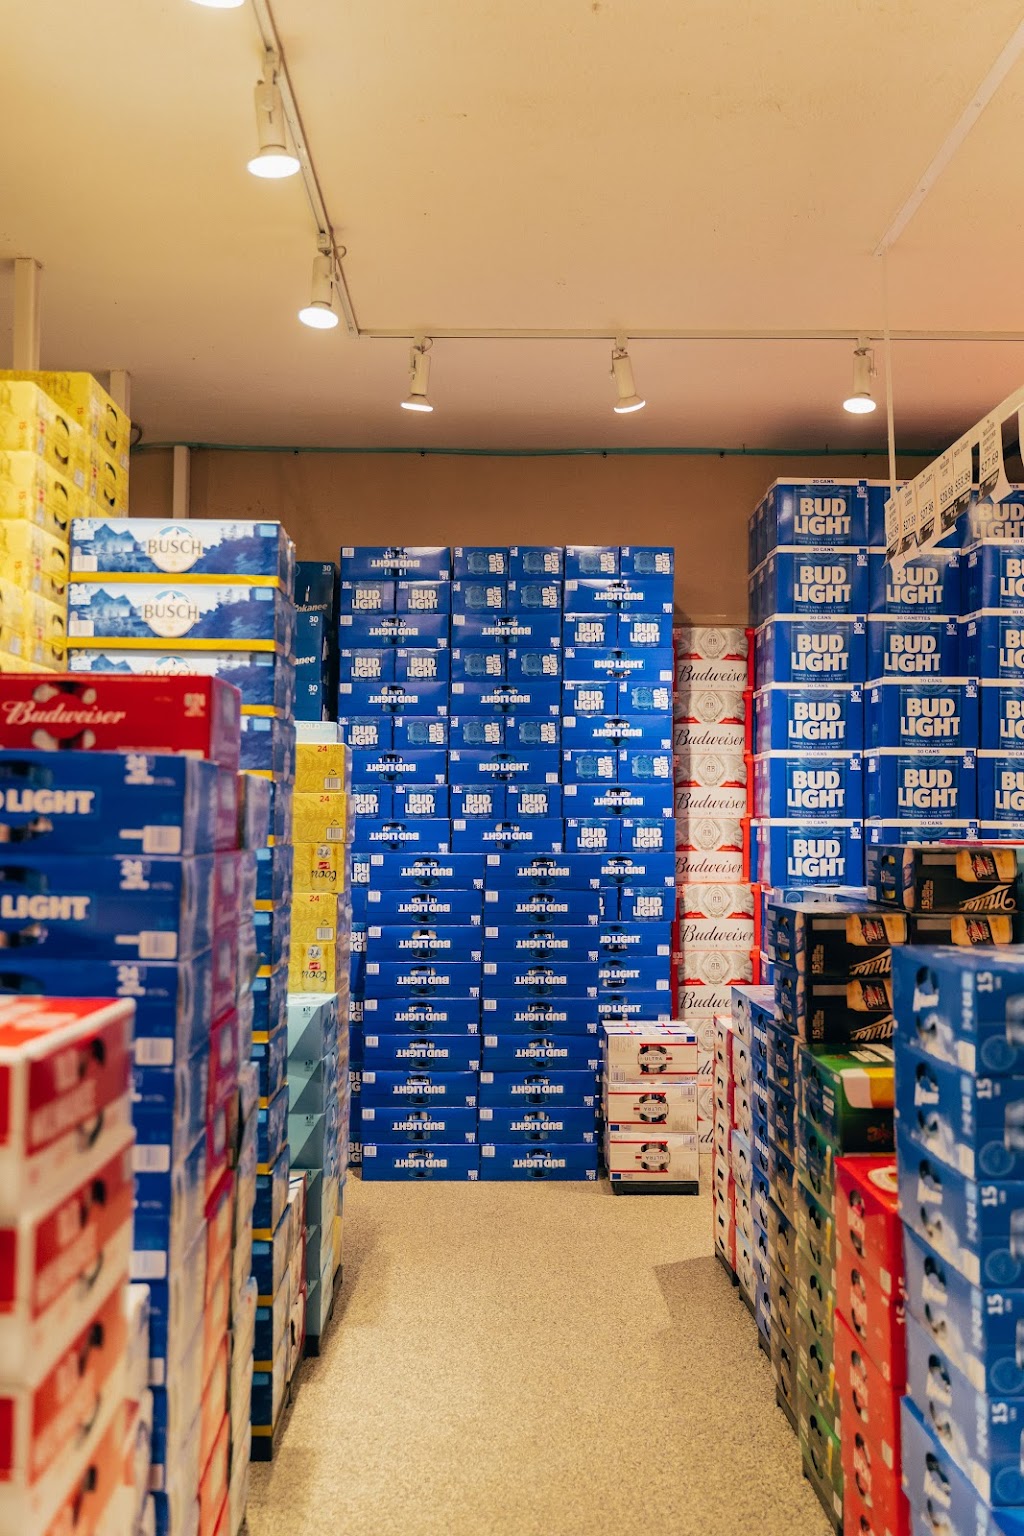 Quality Cold Beer Store | store | 851 Main St, Winkler, MB R6W 0M7, Canada | 2043254381 OR +1 204-325-4381